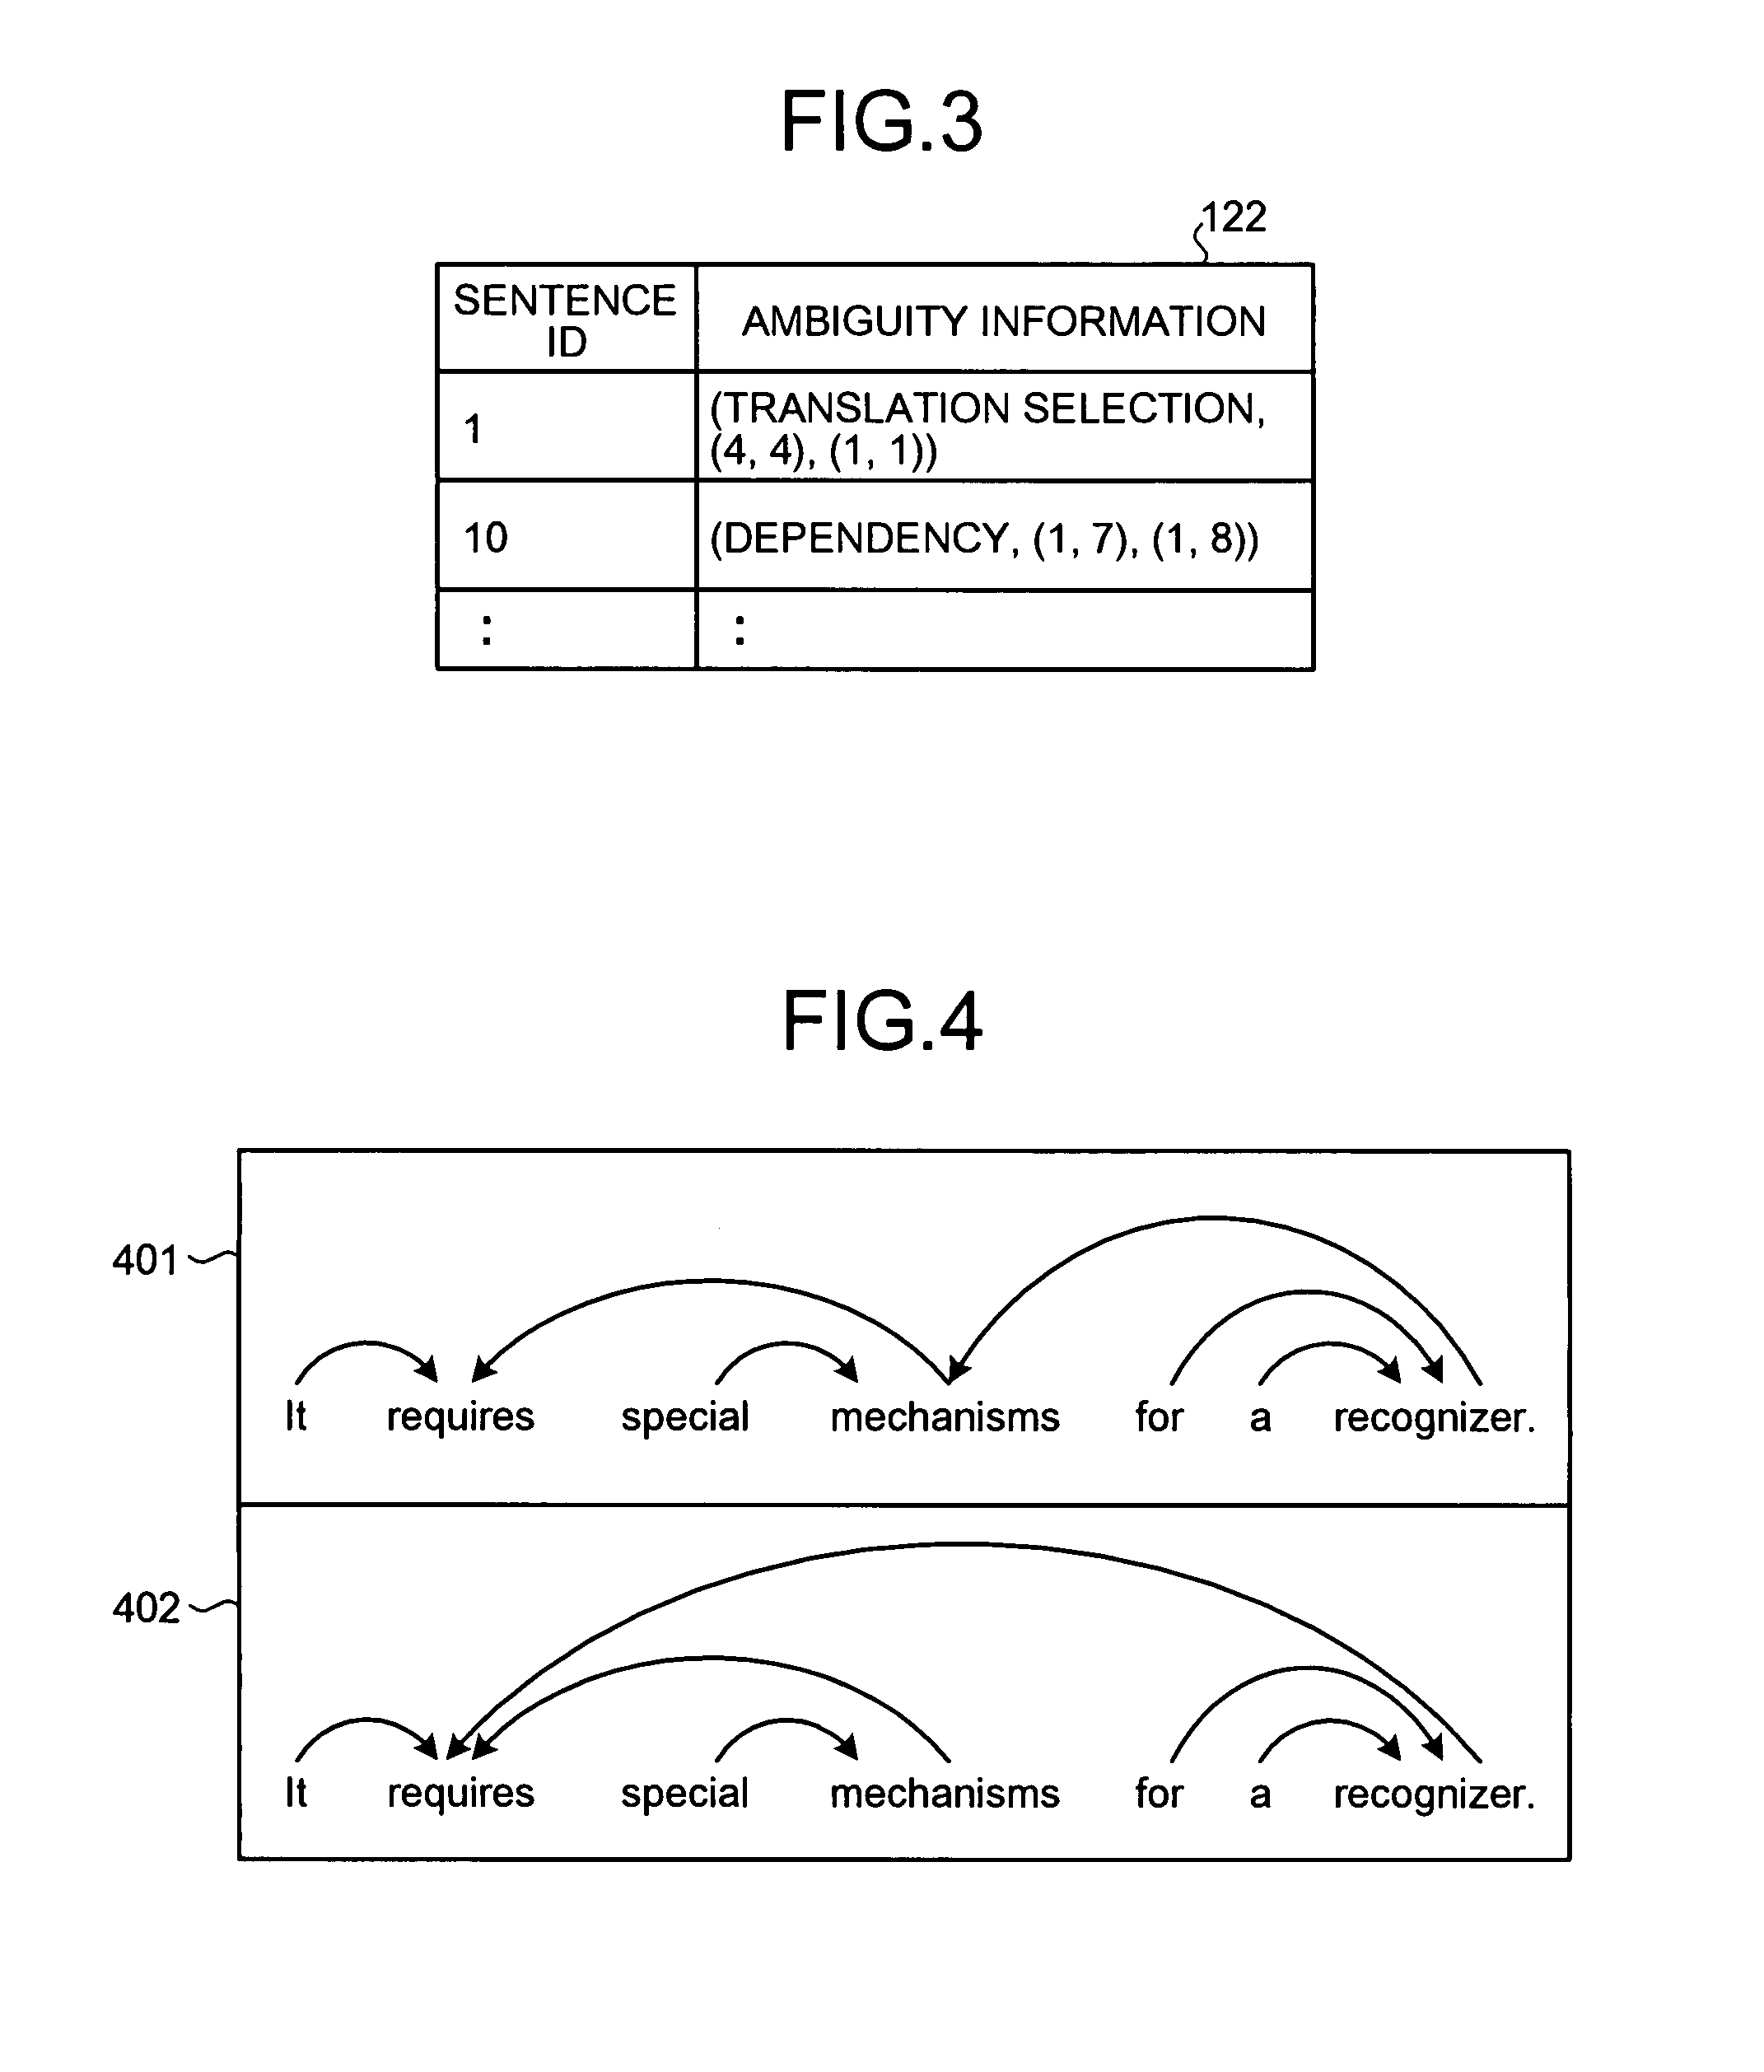 Apparatus, system, method, and computer program product for resolving ambiguities in translations